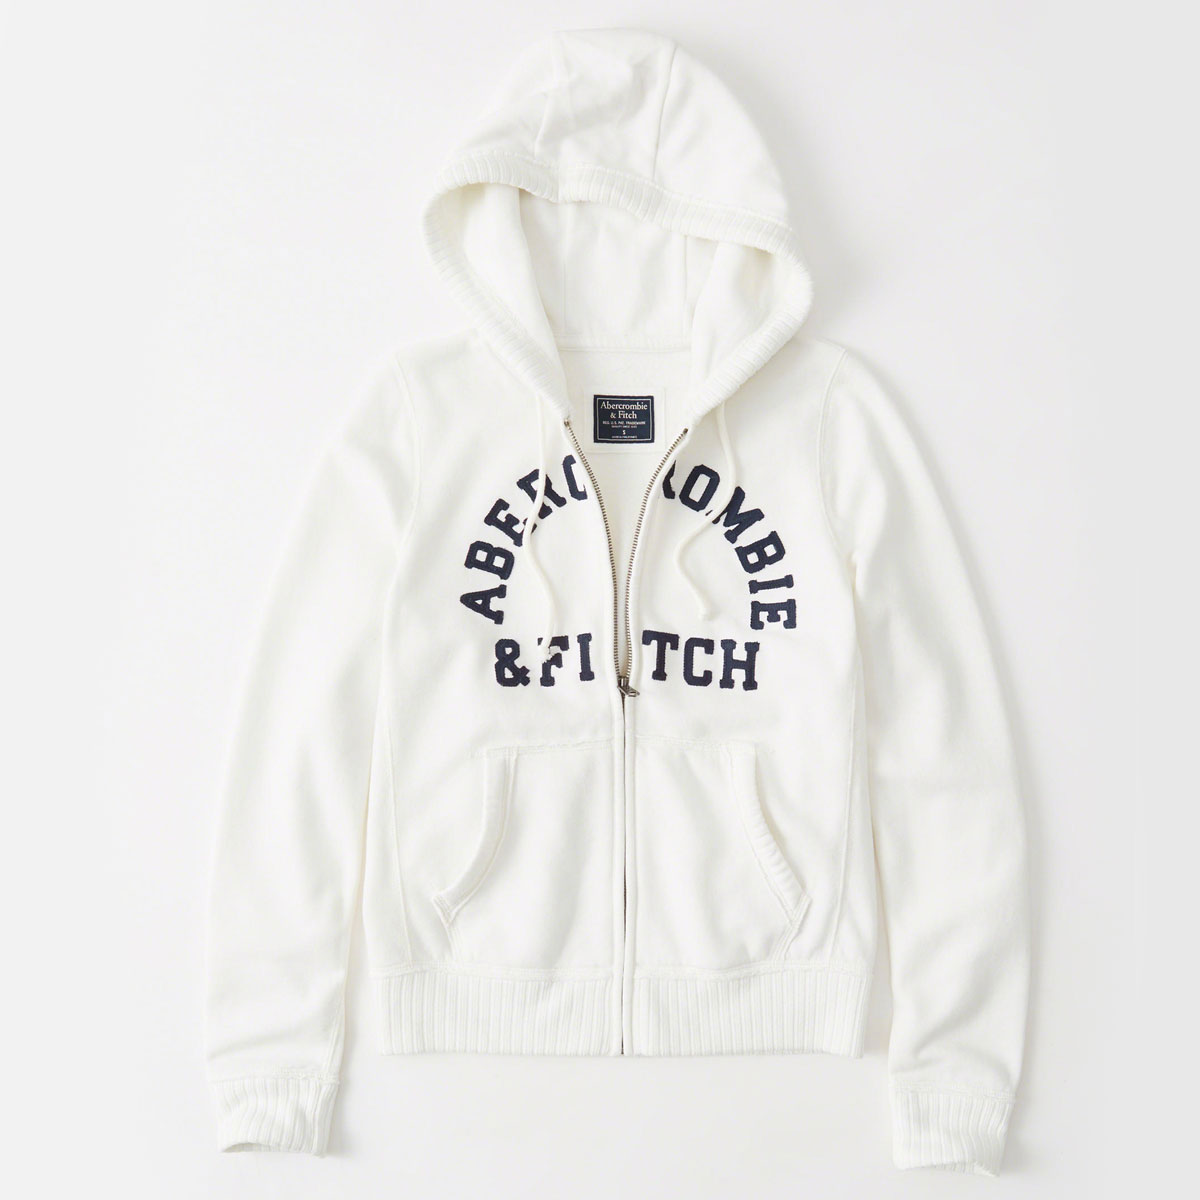 abercrombie fitch hoodie